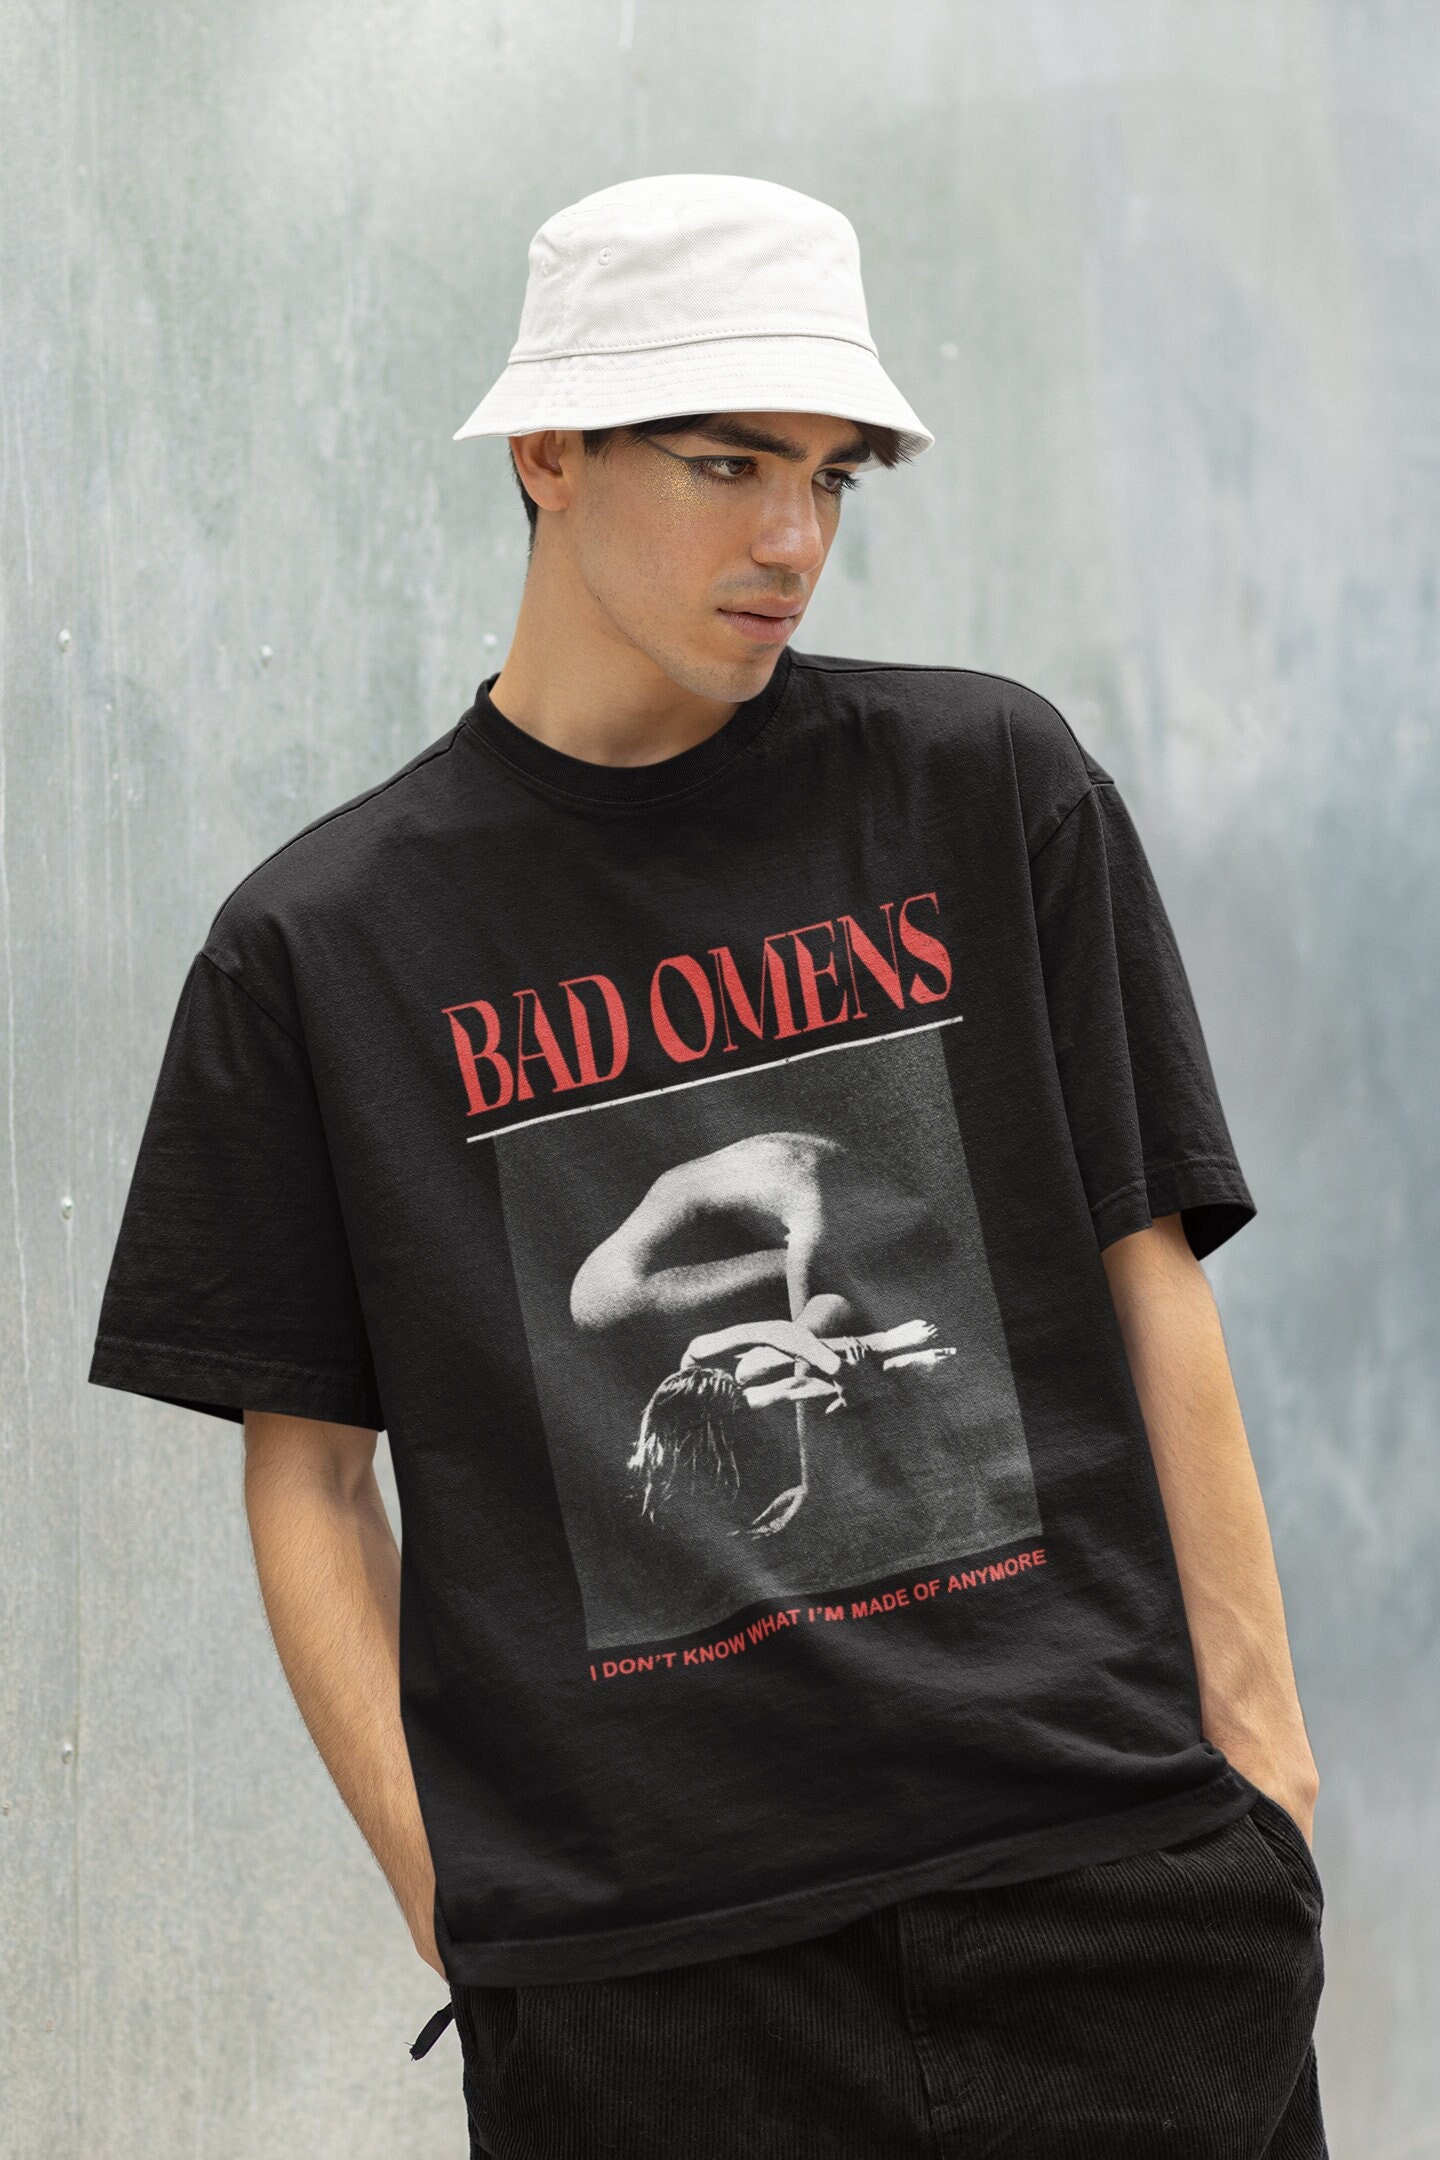 Stay Ahead of the Game with Bad Omens Official Merchandise